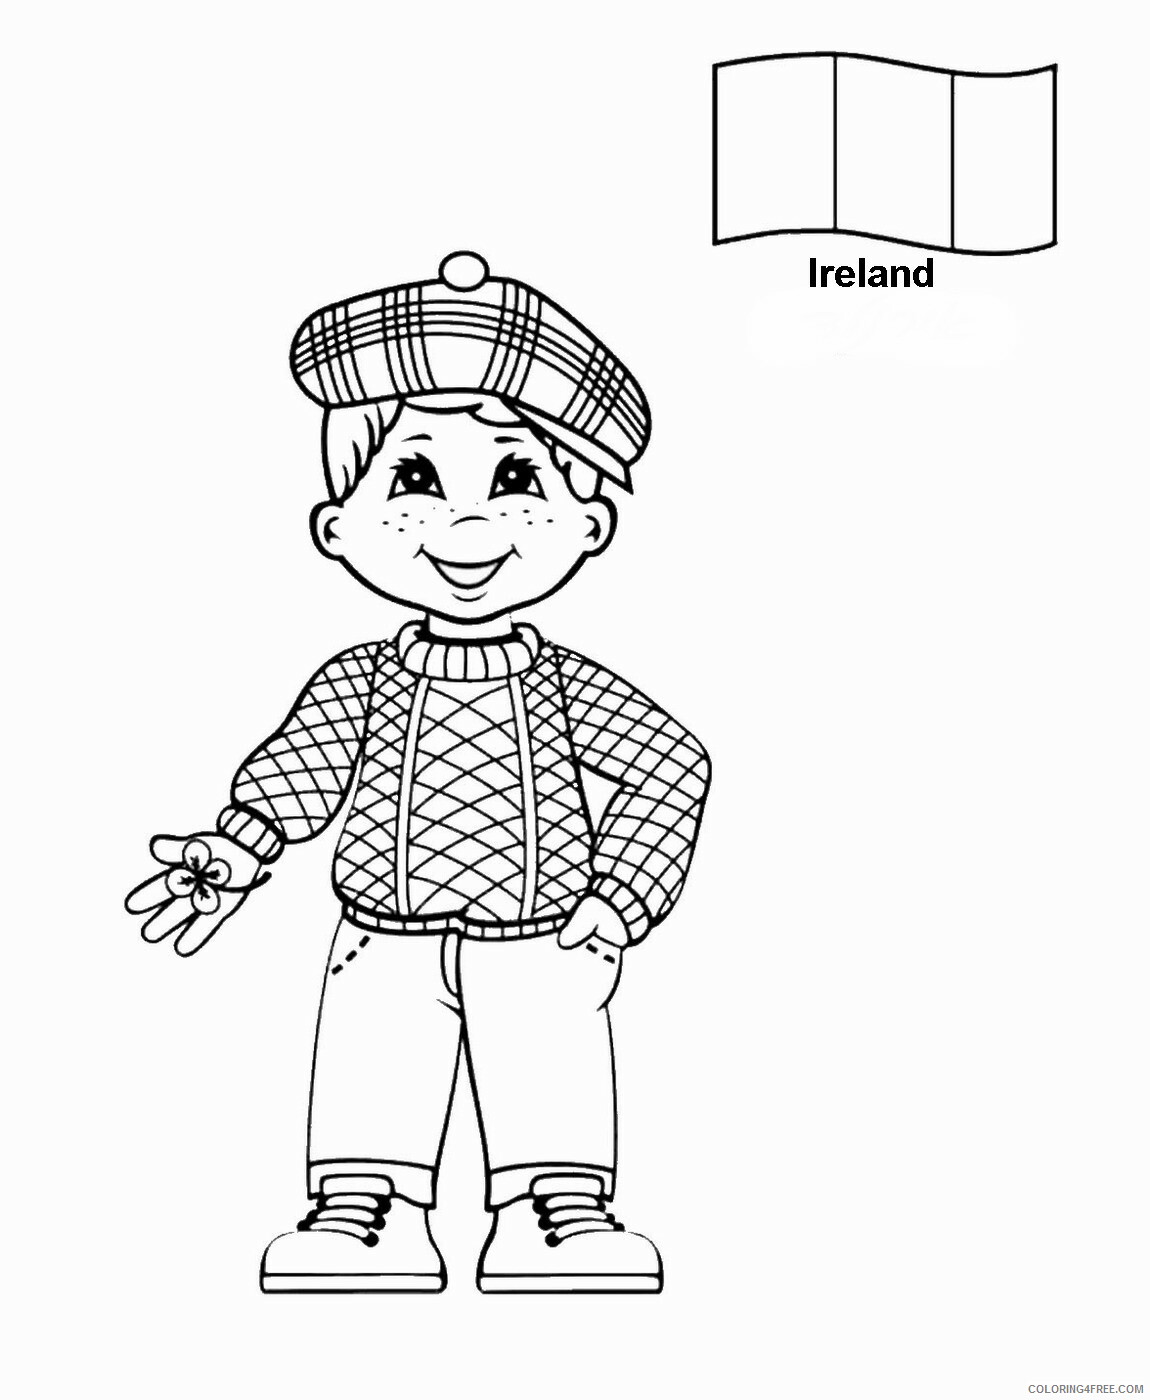 Around the World Coloring Pages ireland Printable 2021 0324 Coloring4free